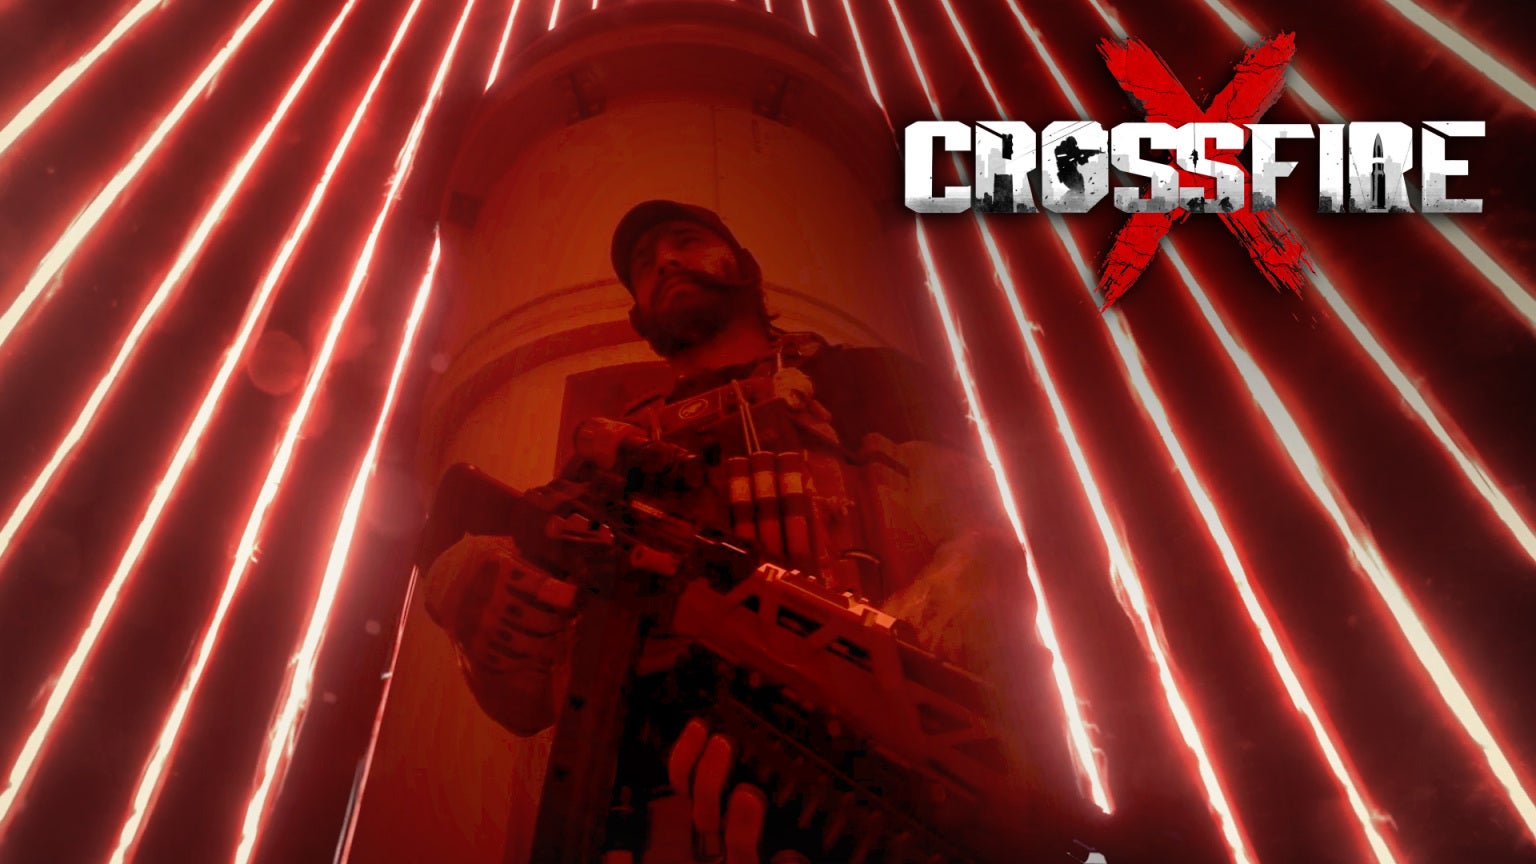 Image for Crossfire X trailer song was a sad cover of "X Gon' Give it to Ya"